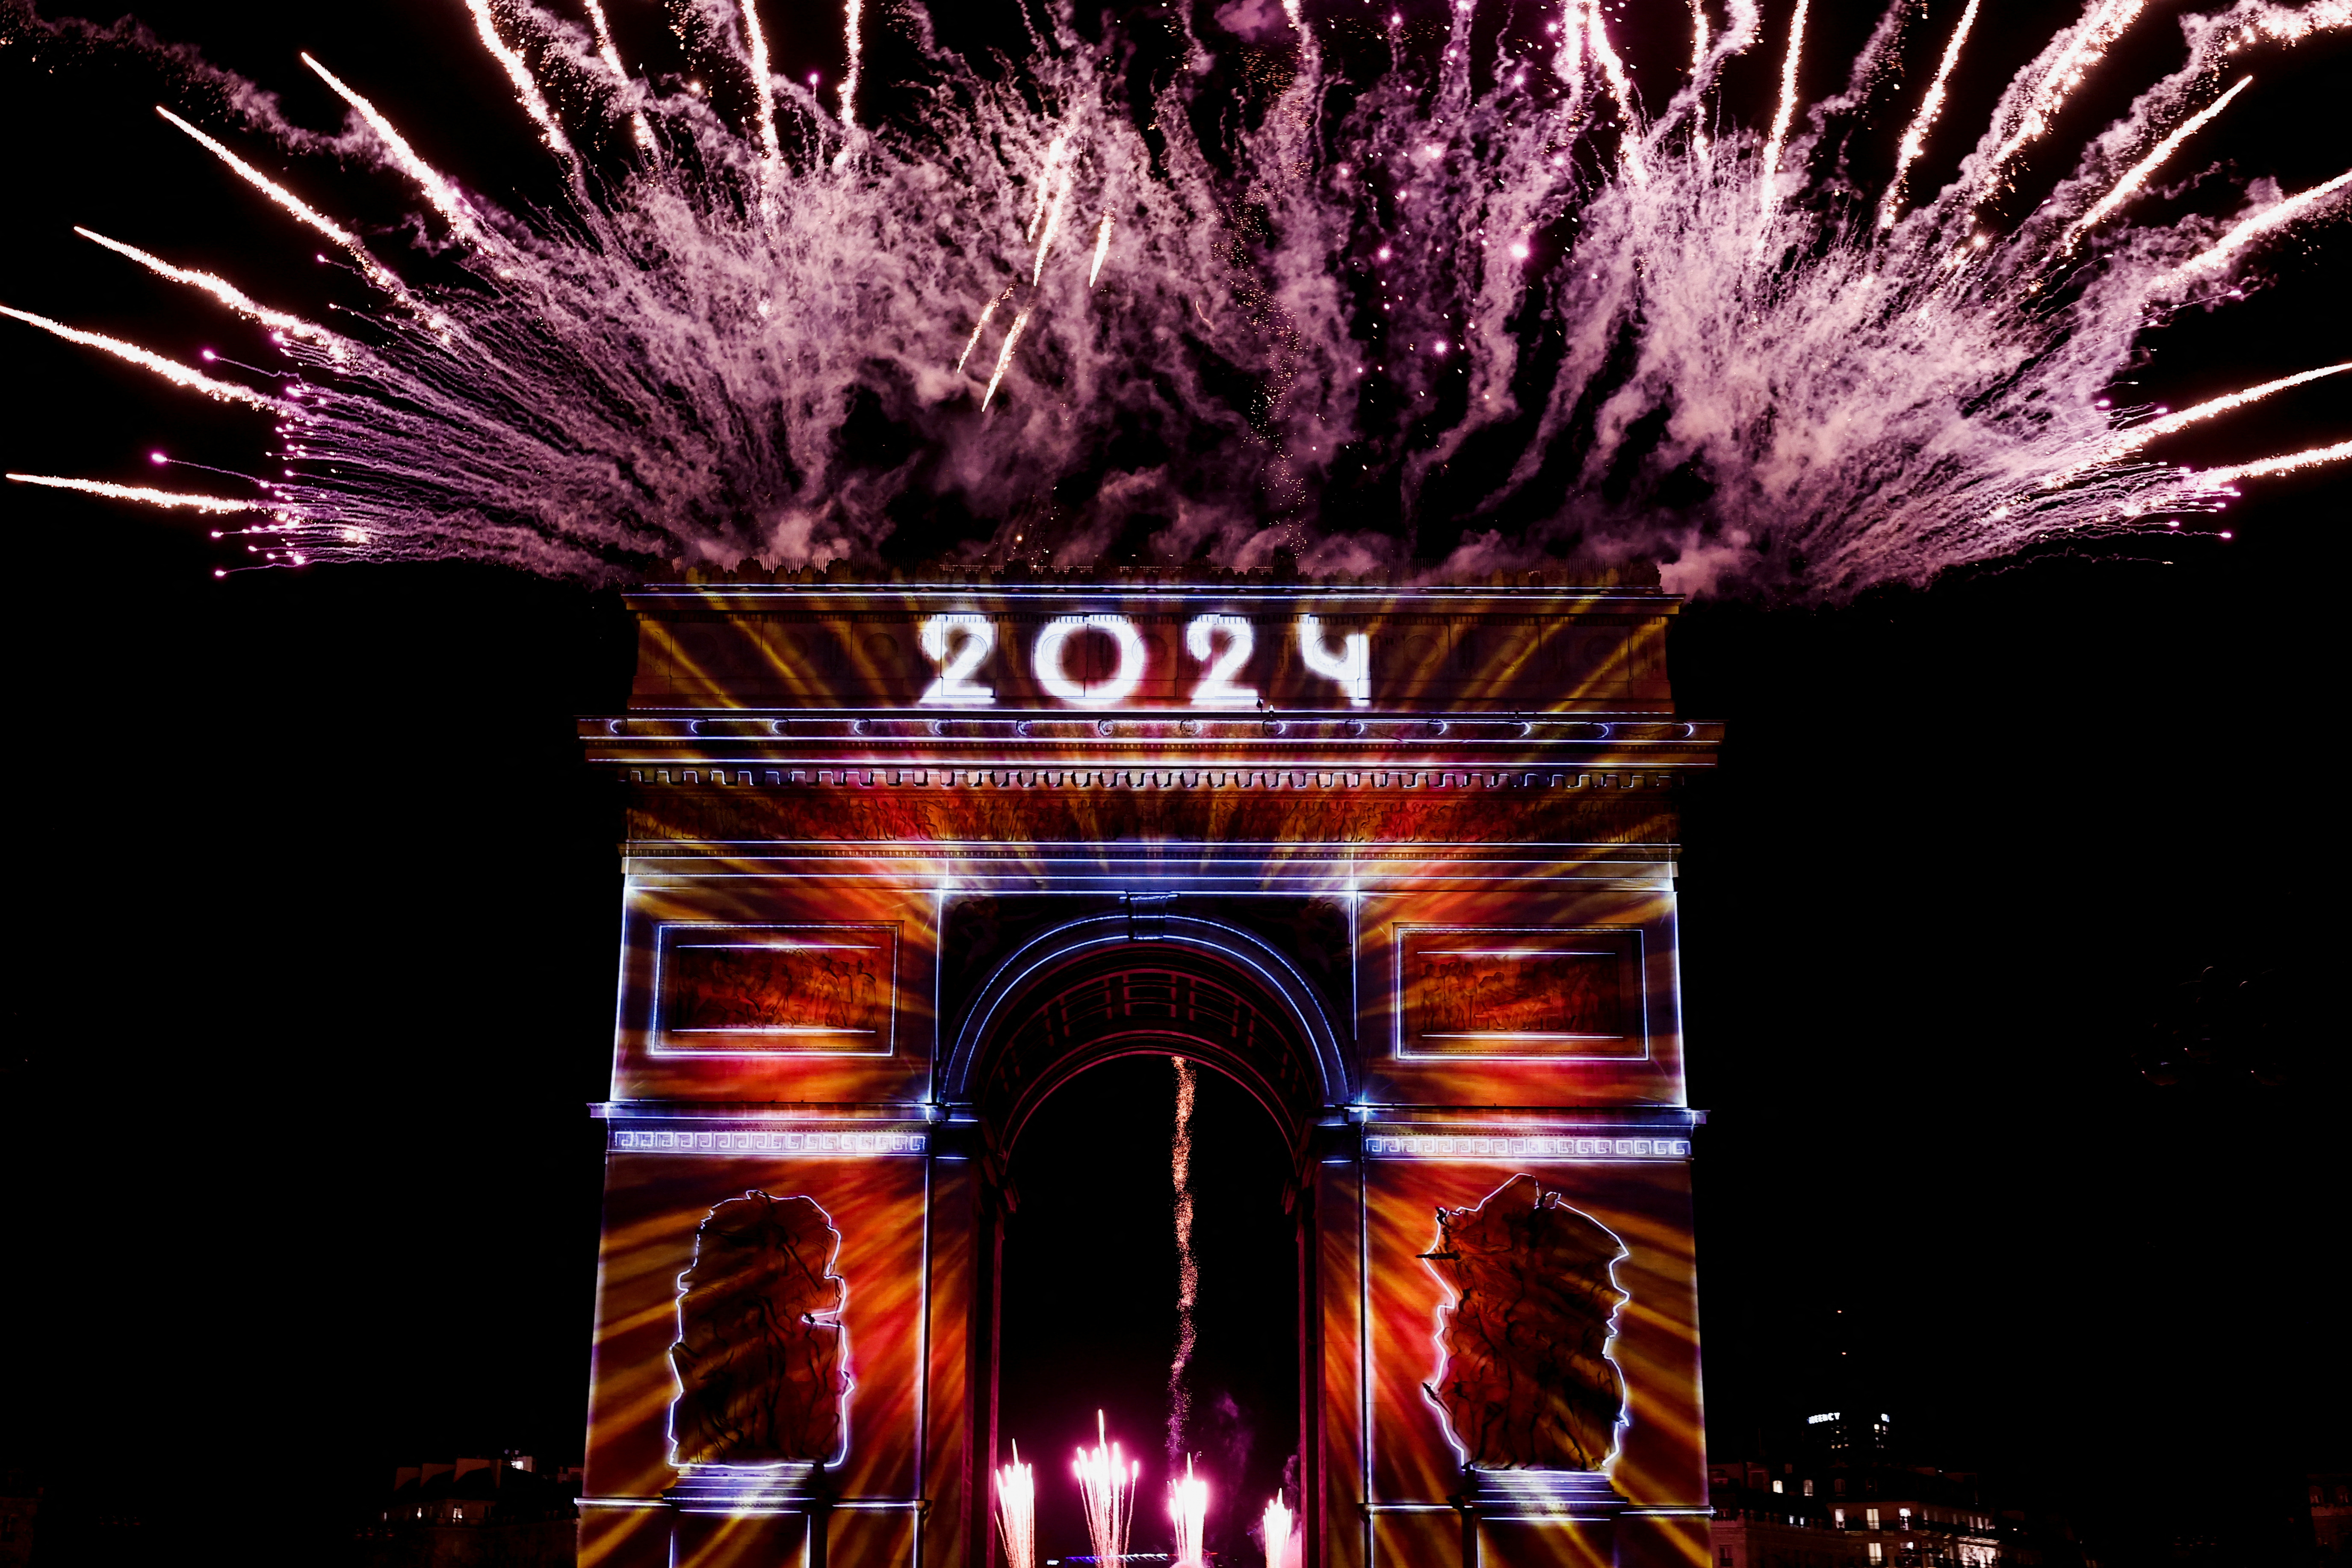 New Year celebrations on the Champs Elysees in Paris